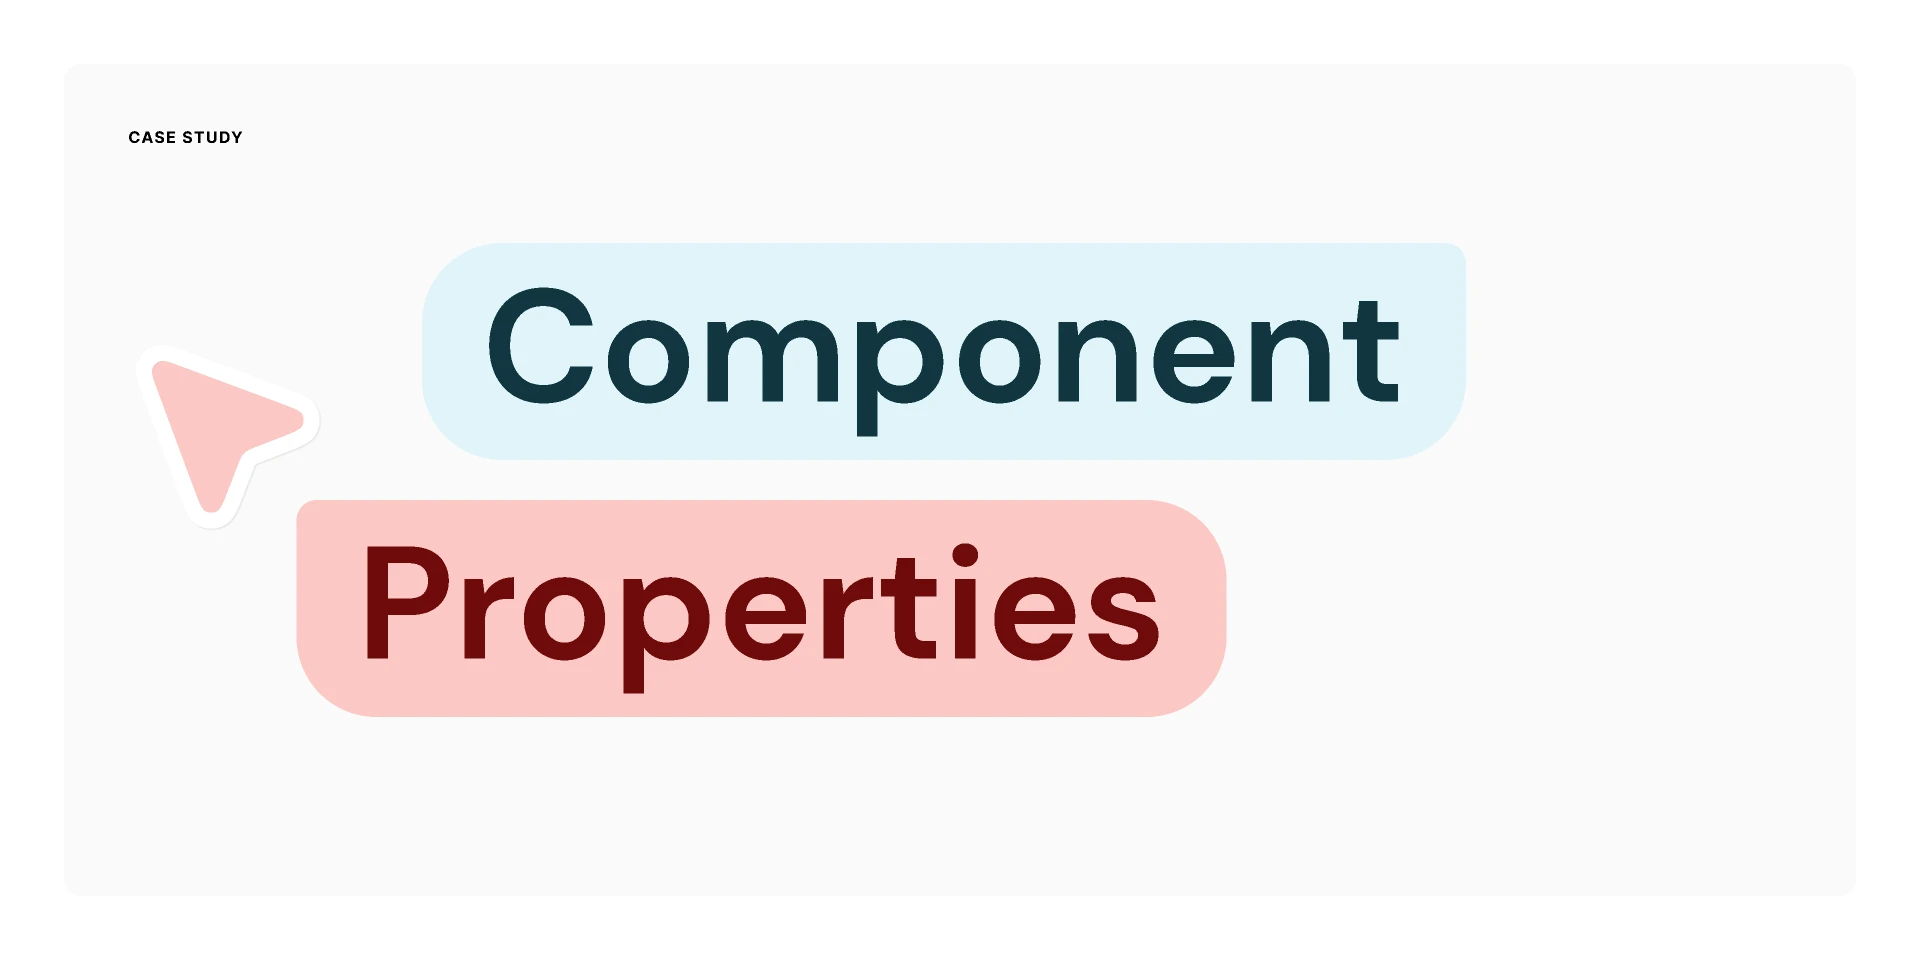 Component Properties (Case Study) for Figma and Adobe XD